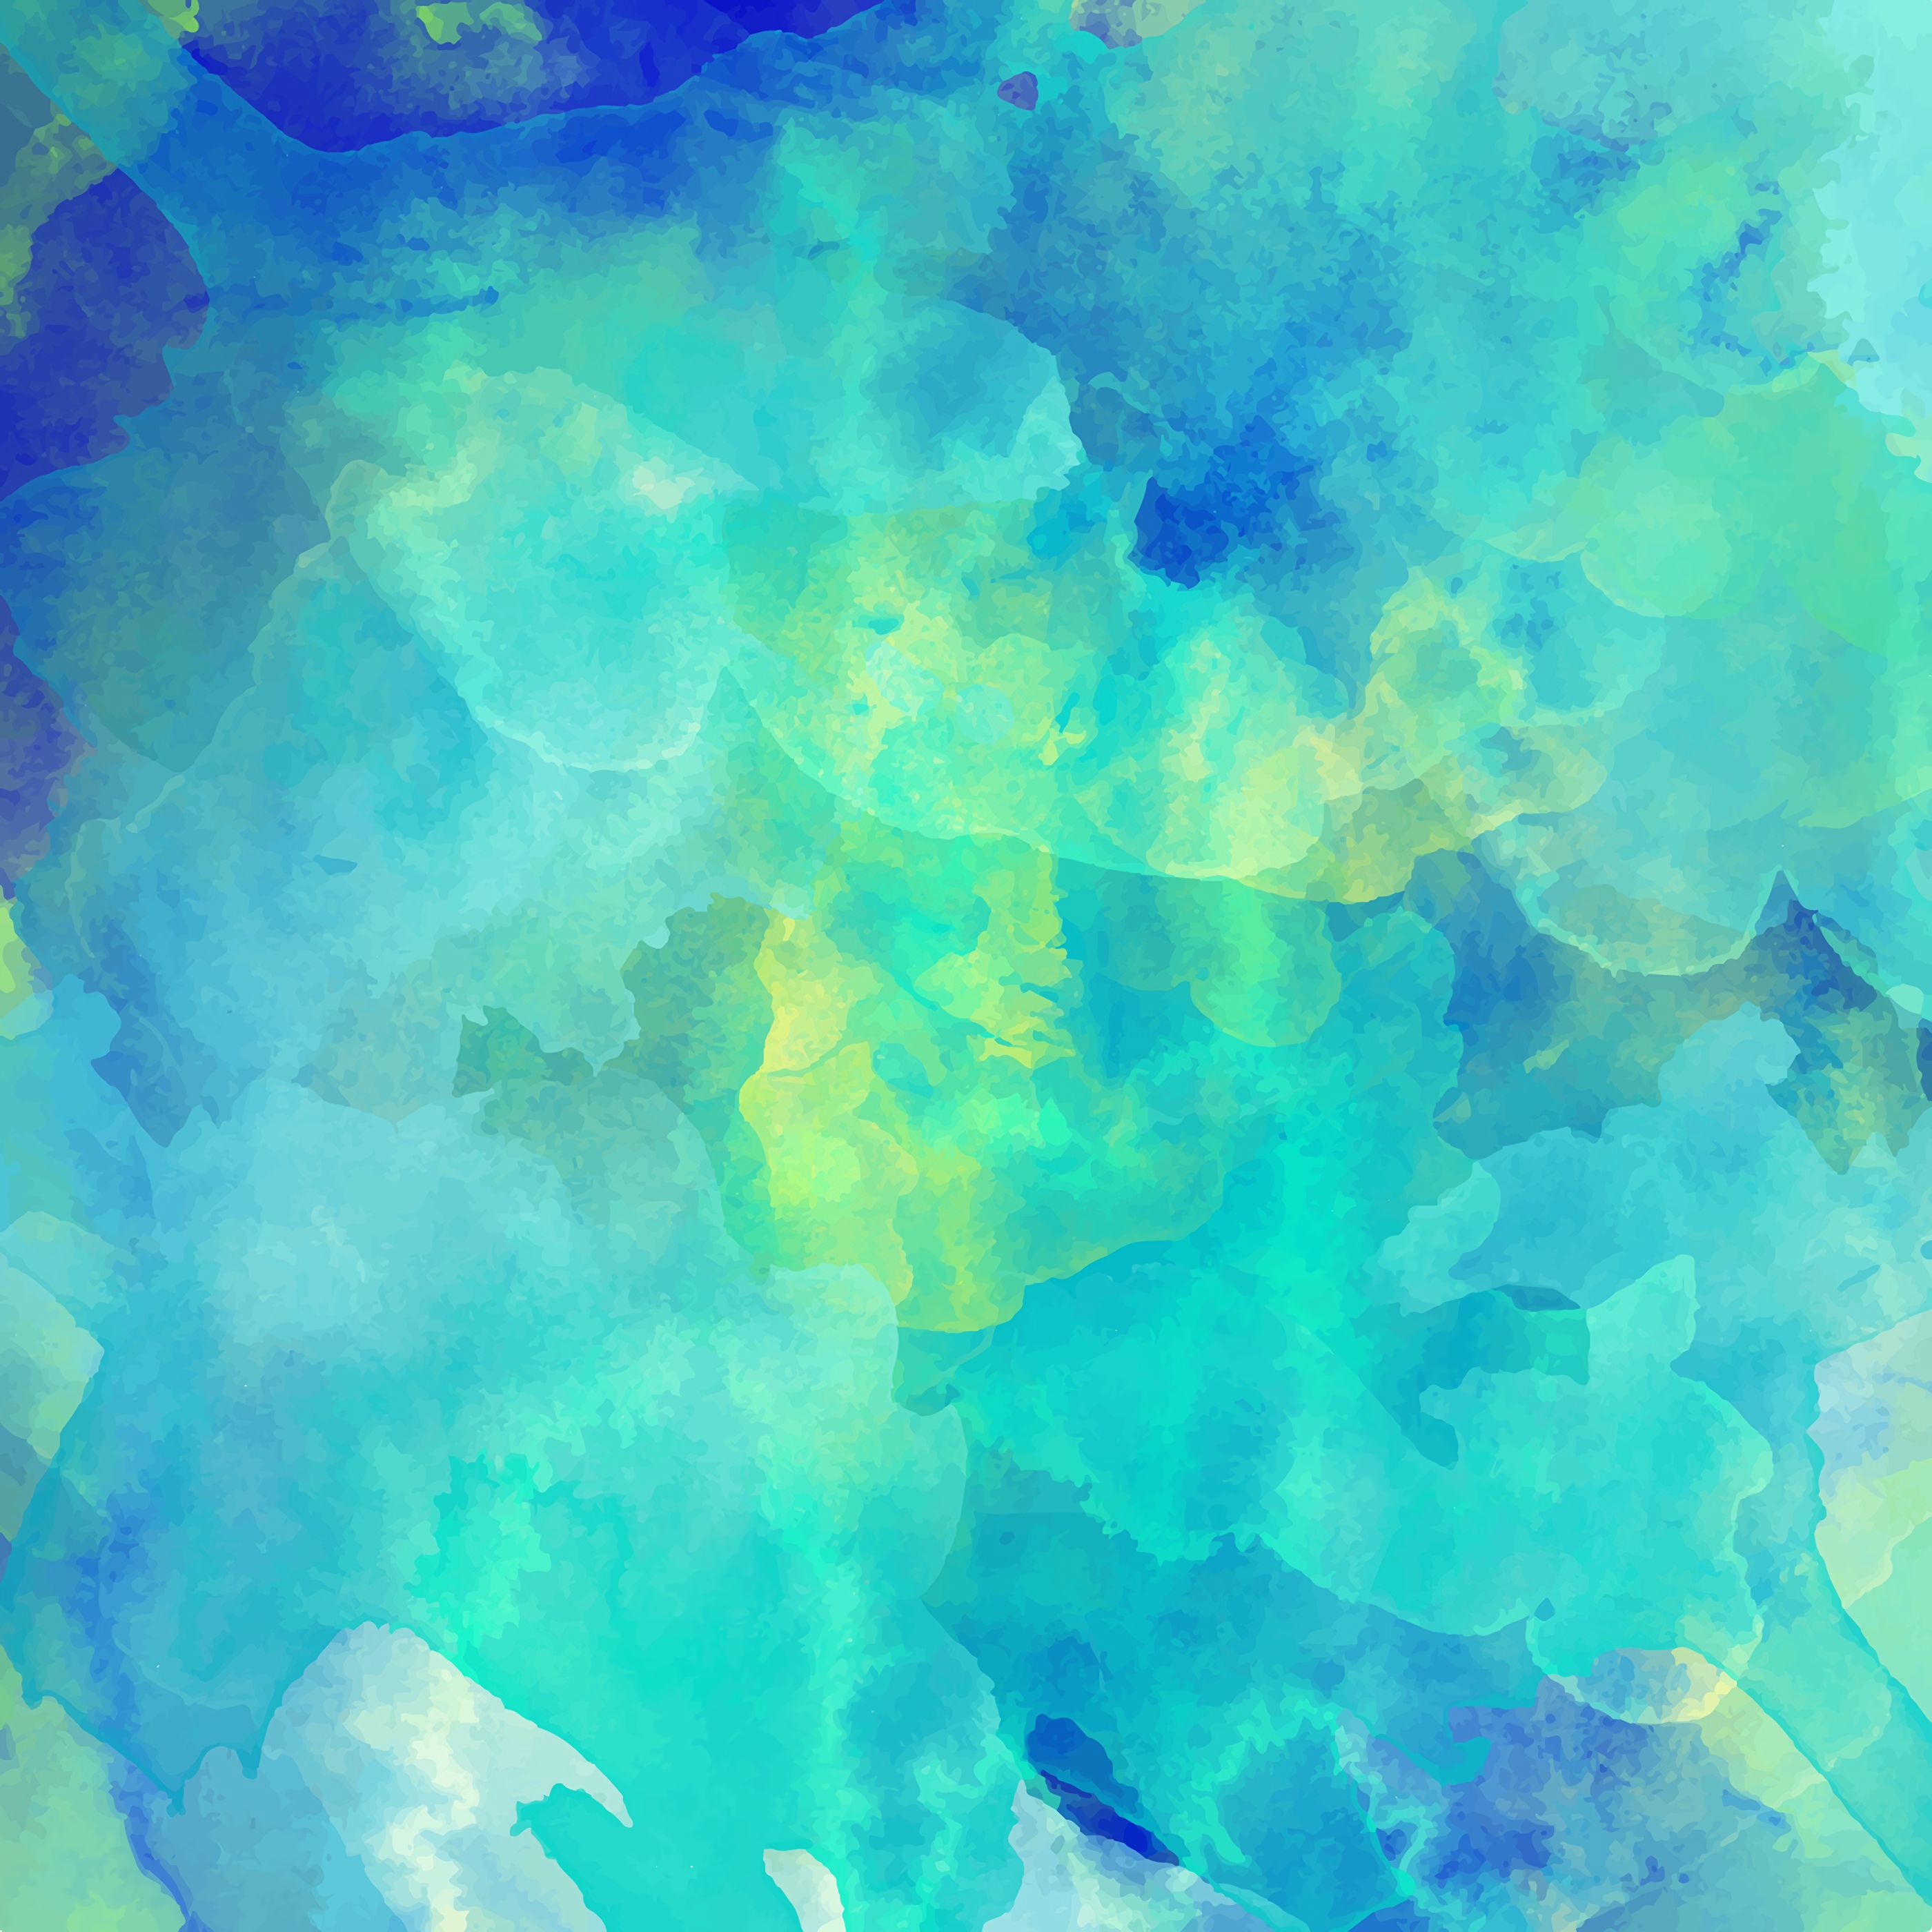 135046 download wallpaper watercolor, divorces, paints, abstract screensavers and pictures for free